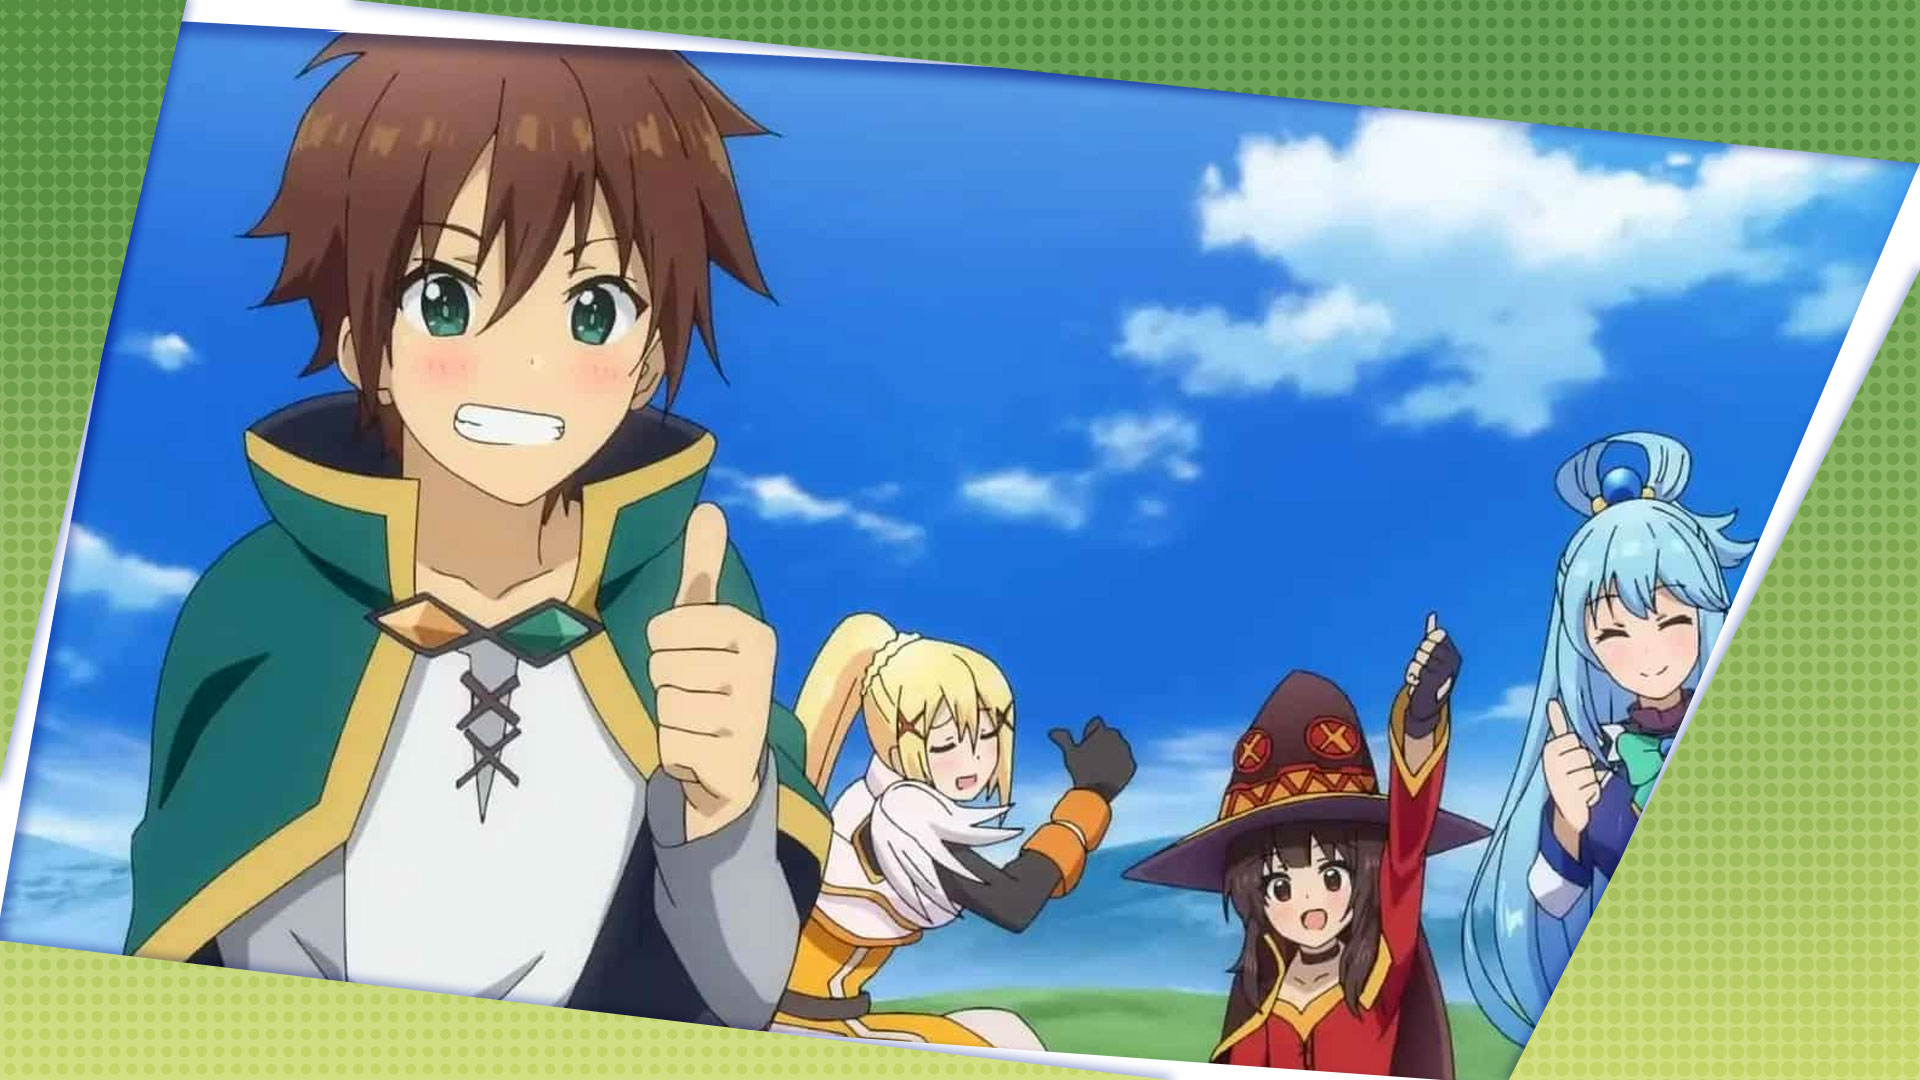 KonoSuba Works as Parody Even if You Haven't Seen Any Other Isekai